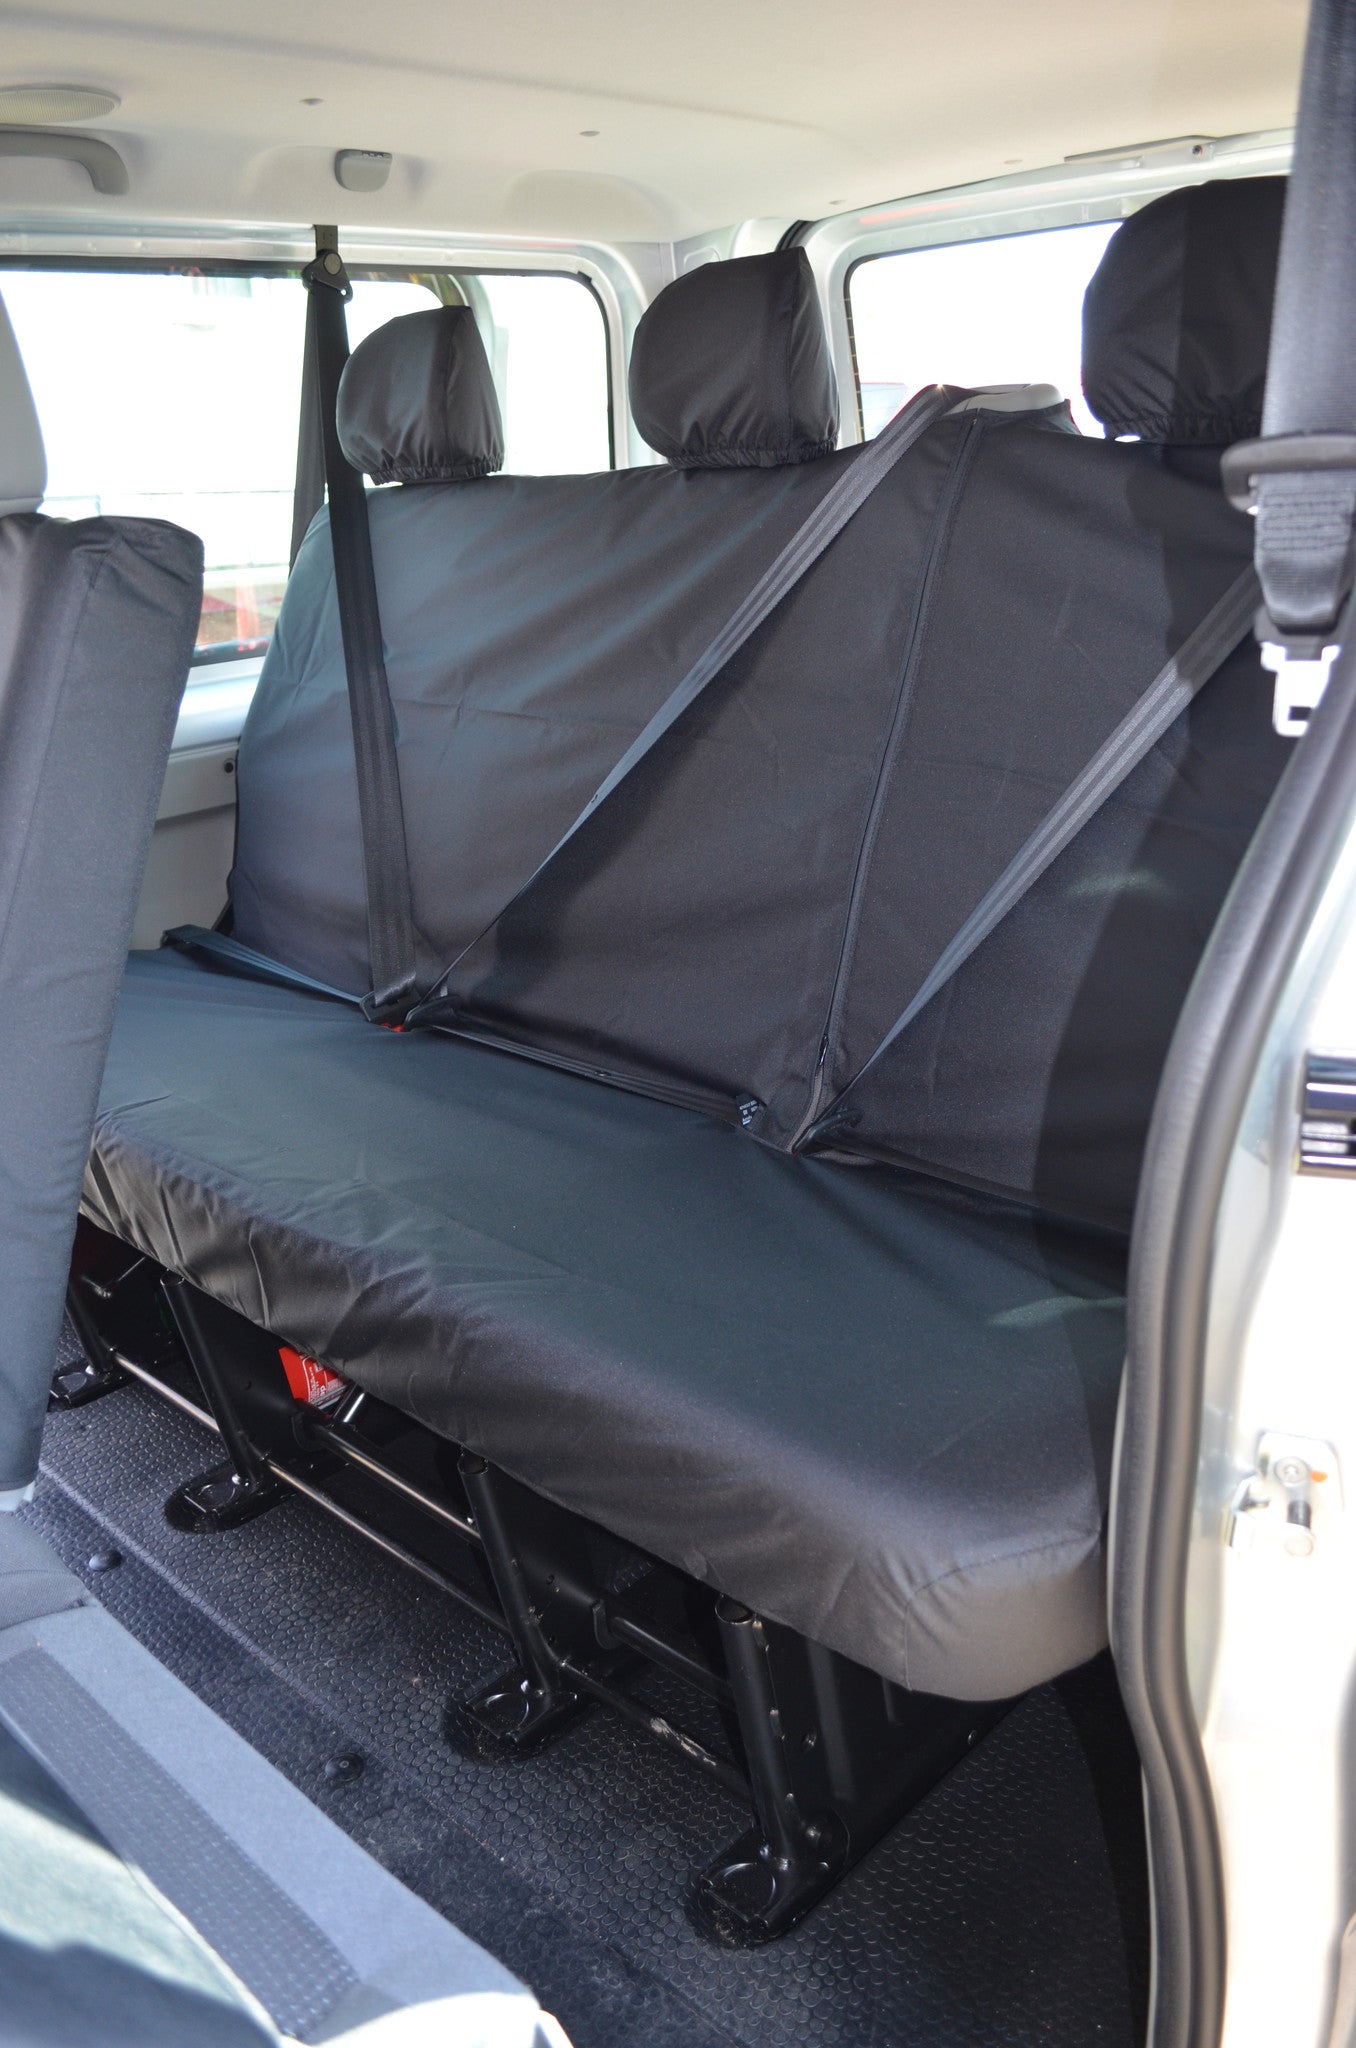 Renault Trafic Passenger 2001 - 2006 Seat Covers Black / 3rd Row Bench Turtle Covers Ltd